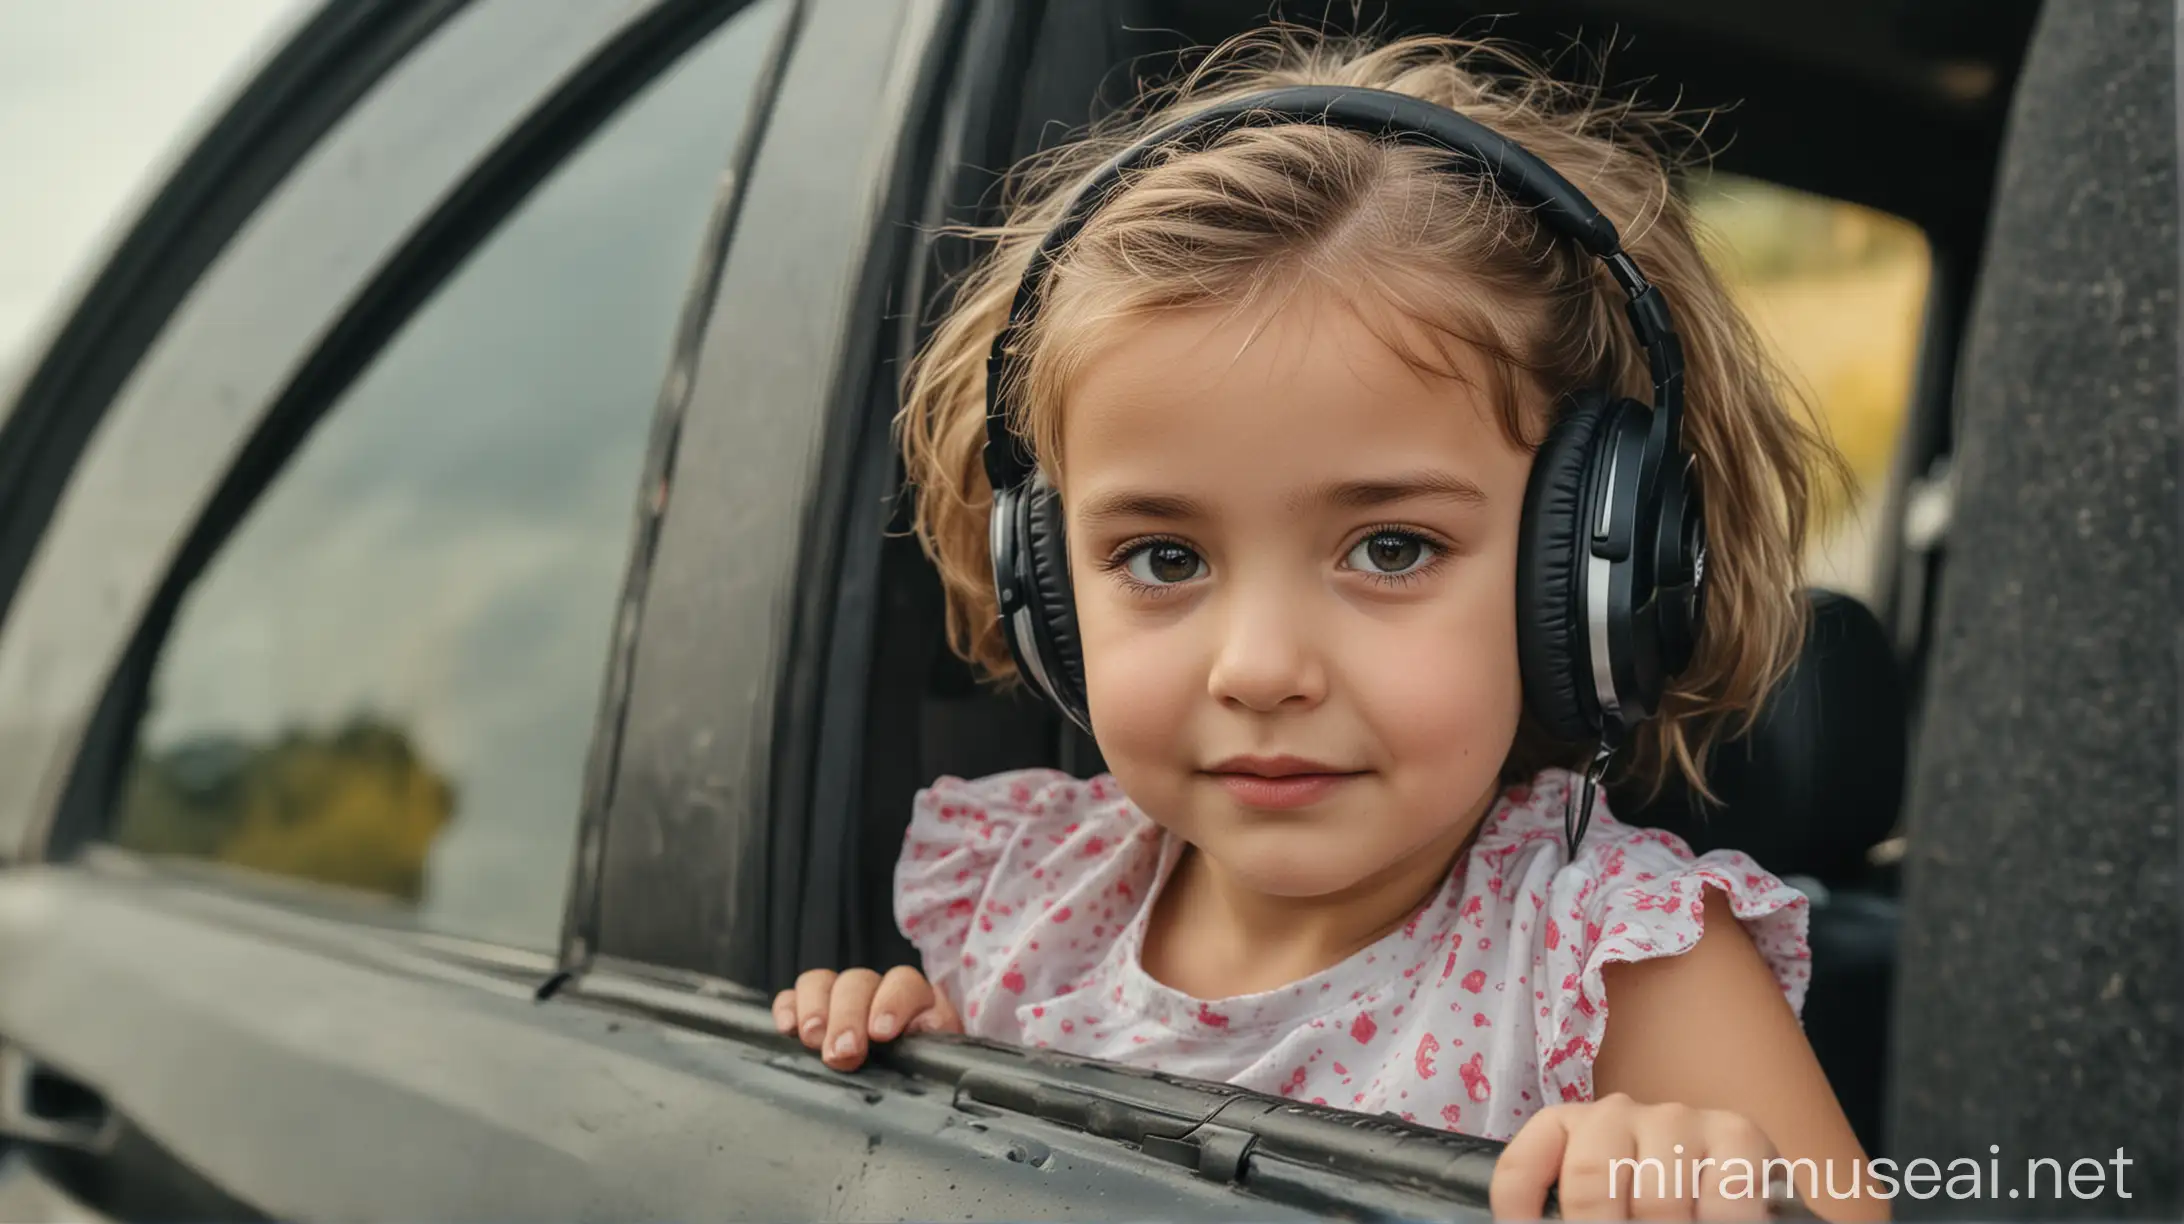 Little girl with headphones looking out of the car window during the ride.